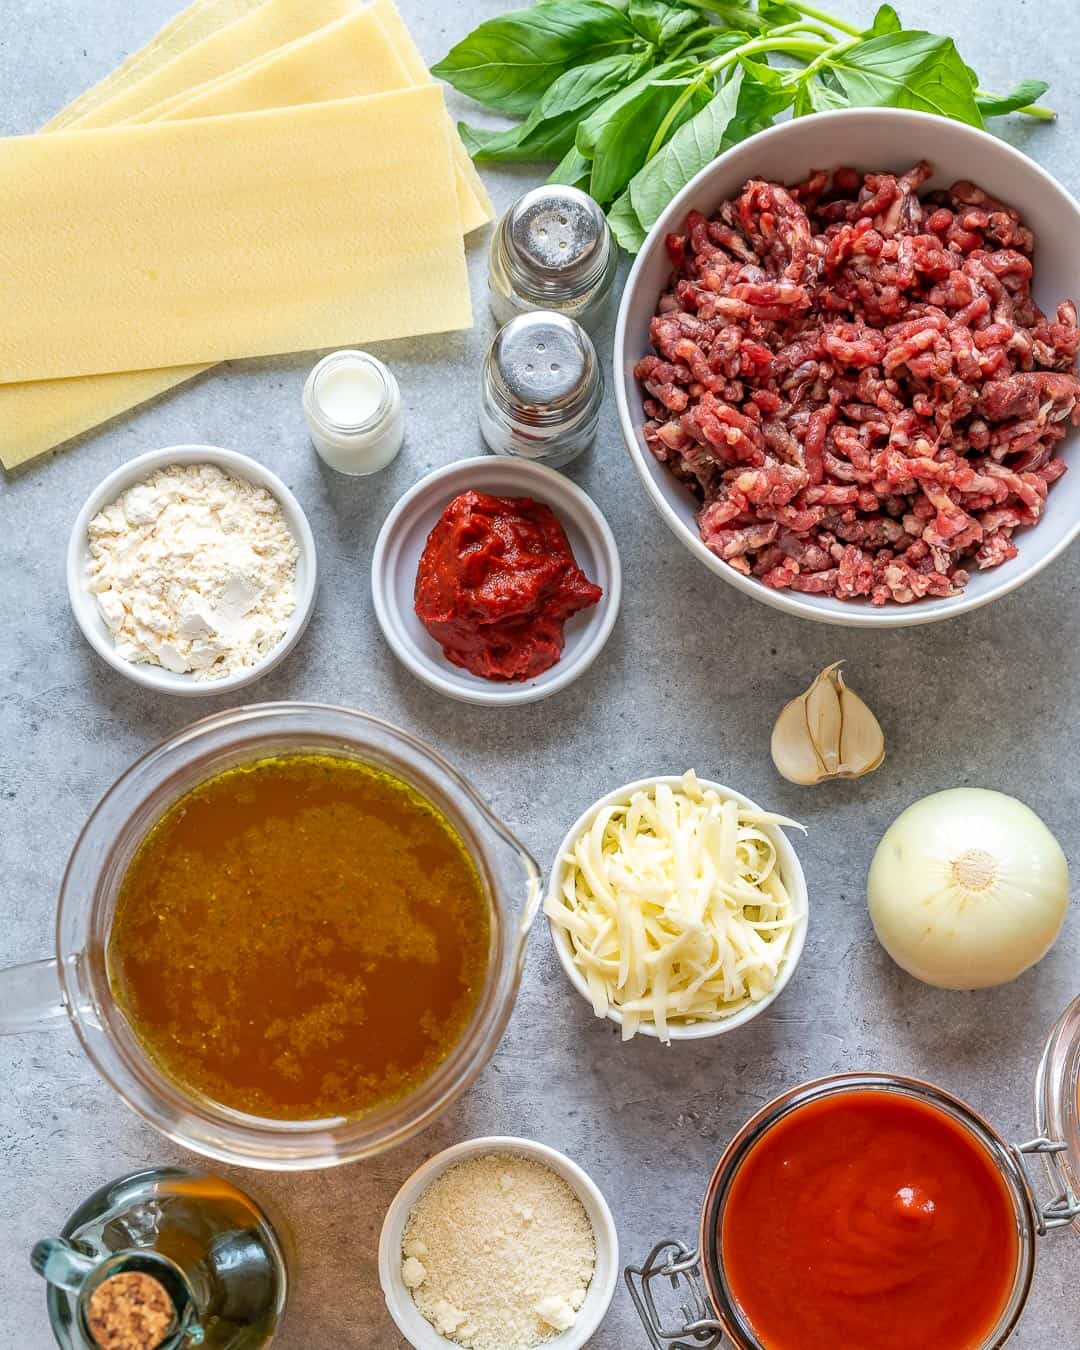 Ingredients for lasagne soup on counter